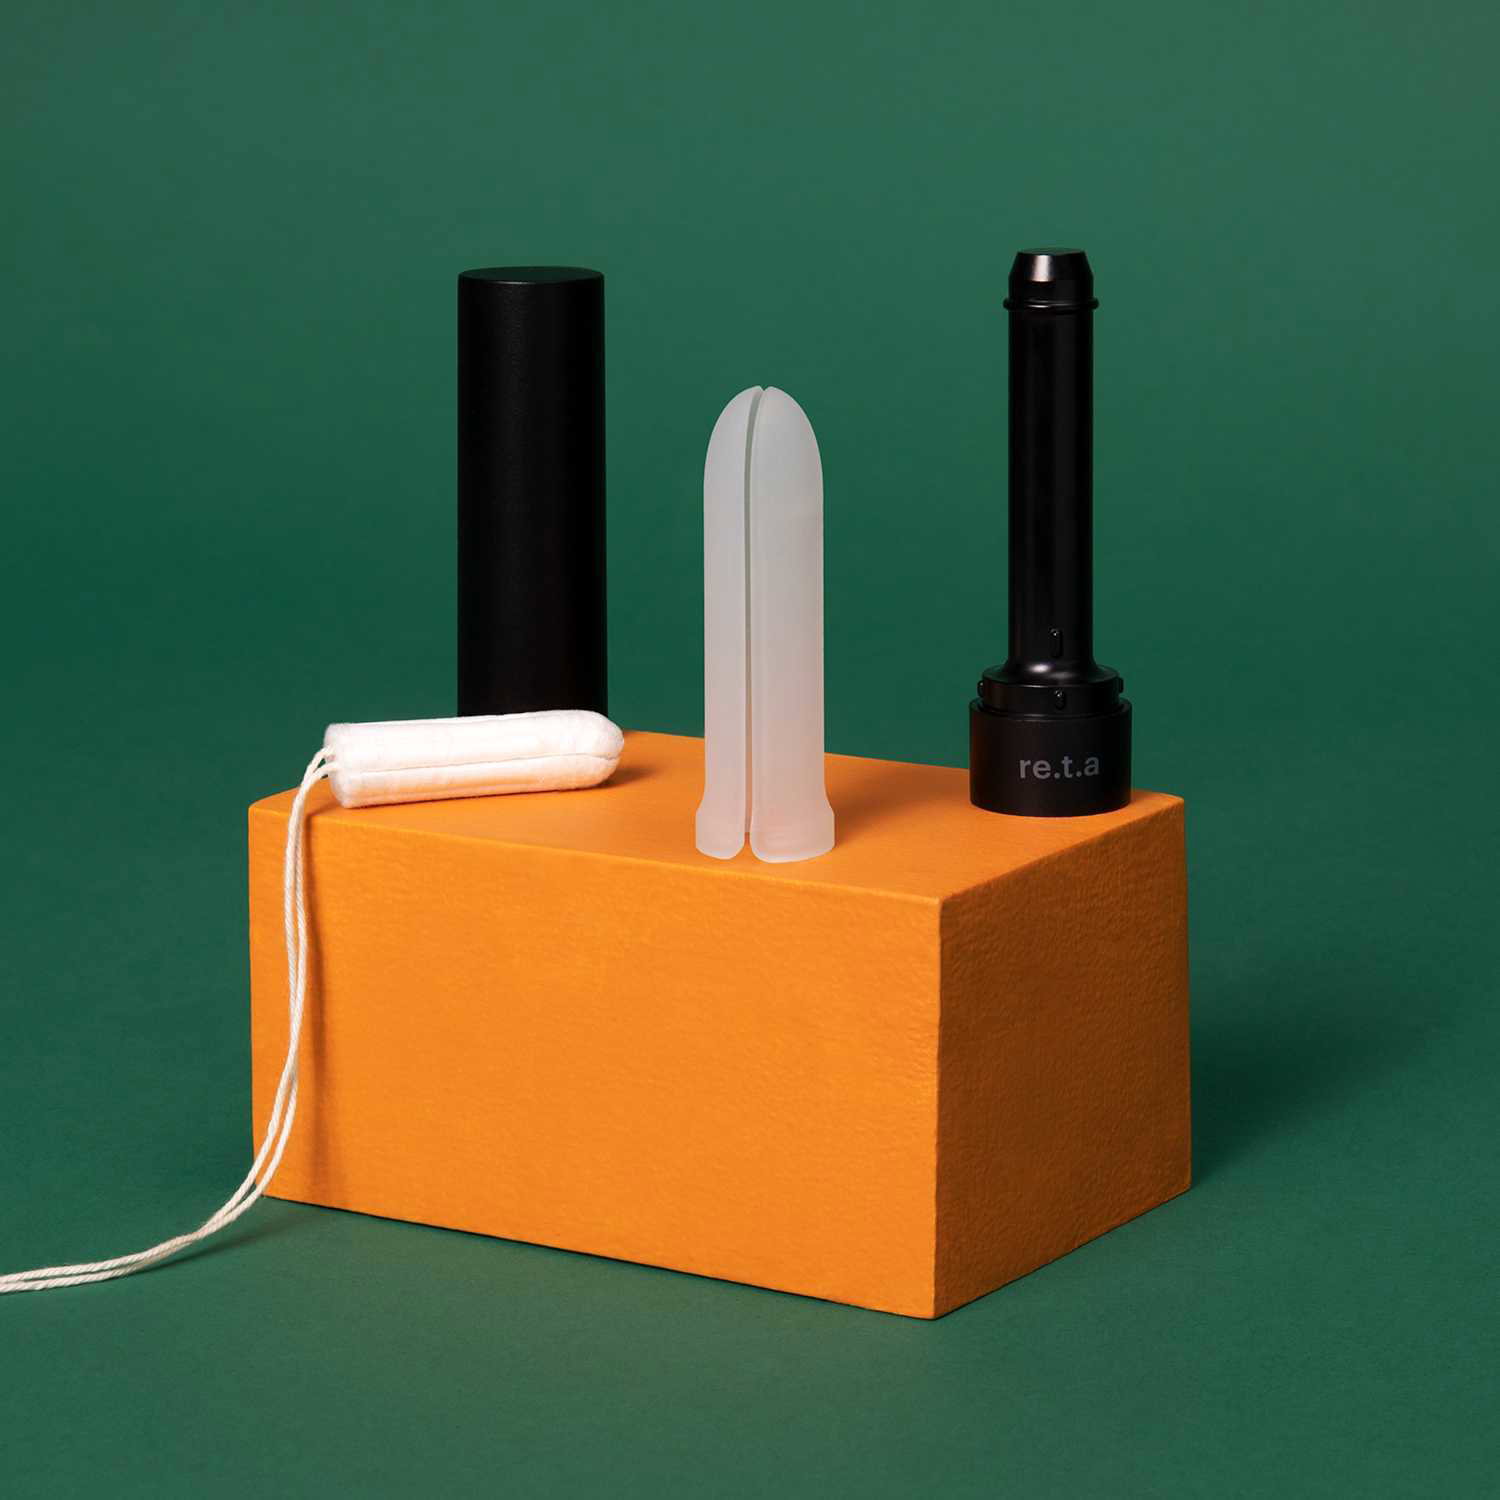 Thinx: Our *new* reusable tampon applicator is here — meet re.t.a